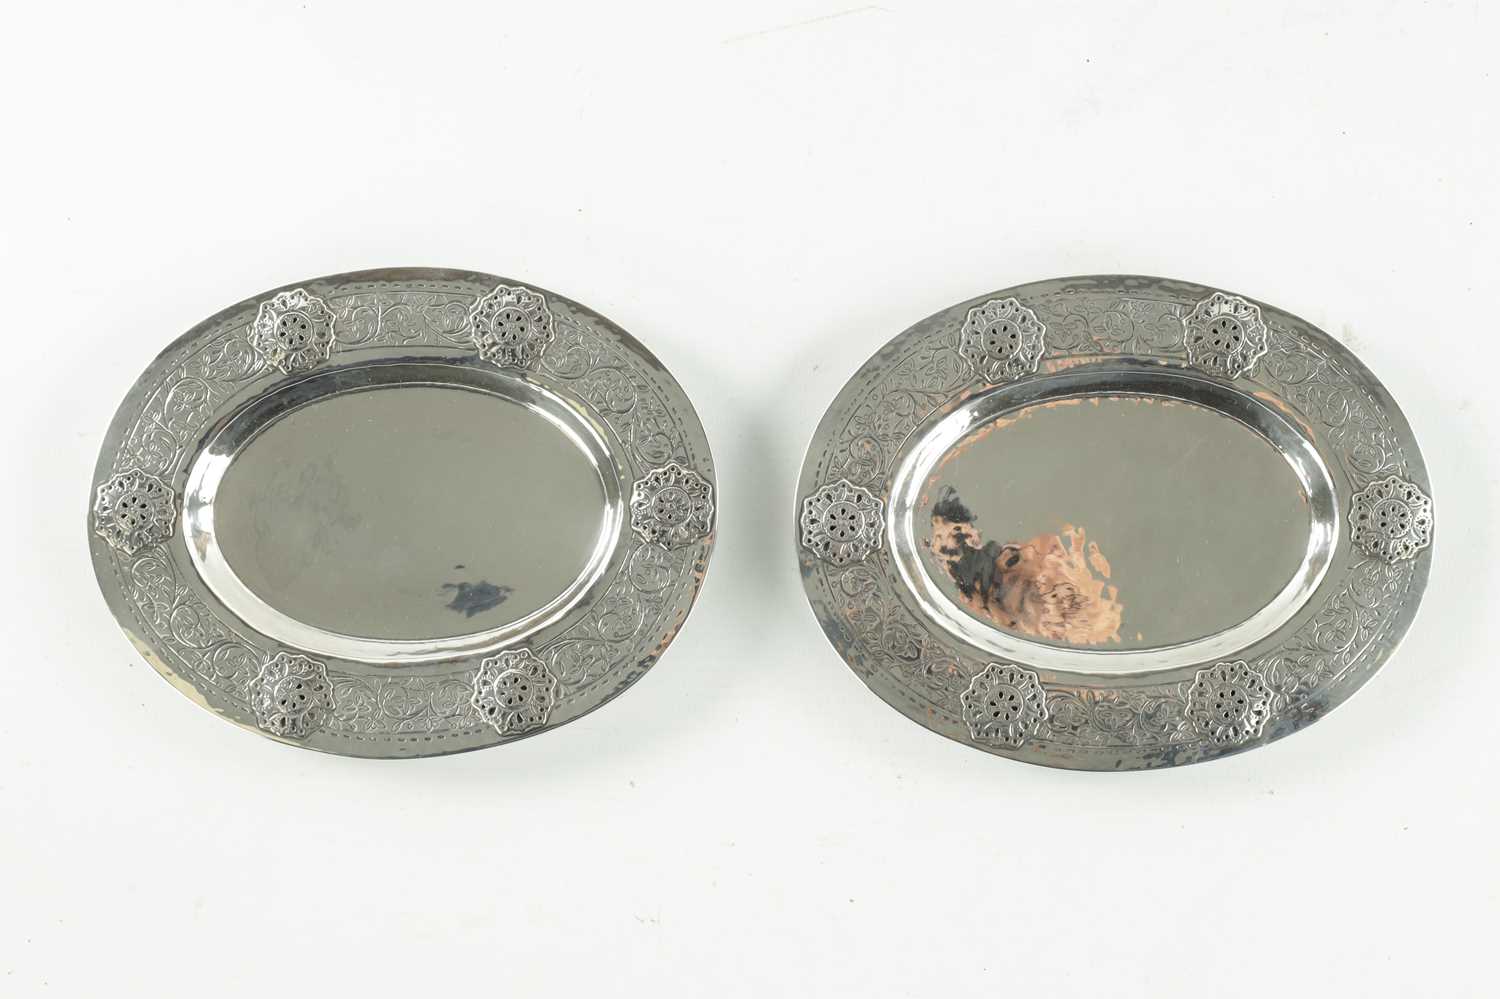 A PAIR OF LIBERTY & CO. ARTS AND CRAFTS SILVER OVAL DISHES DESIGNED BY BERNARD CUZNER - Image 2 of 5